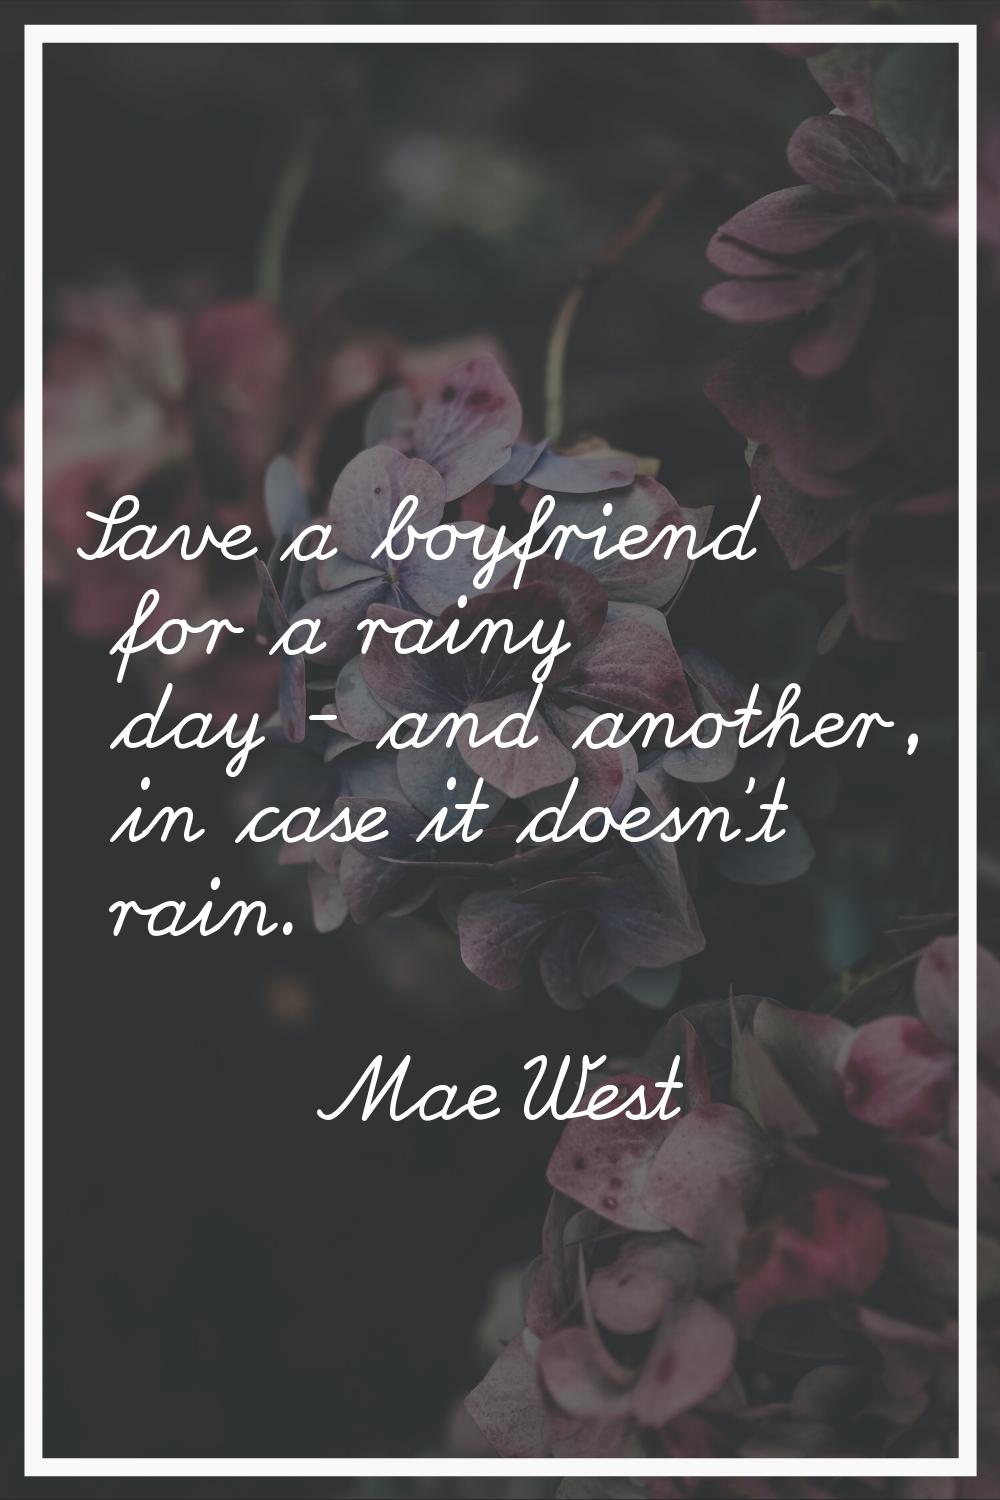 Save a boyfriend for a rainy day - and another, in case it doesn't rain.